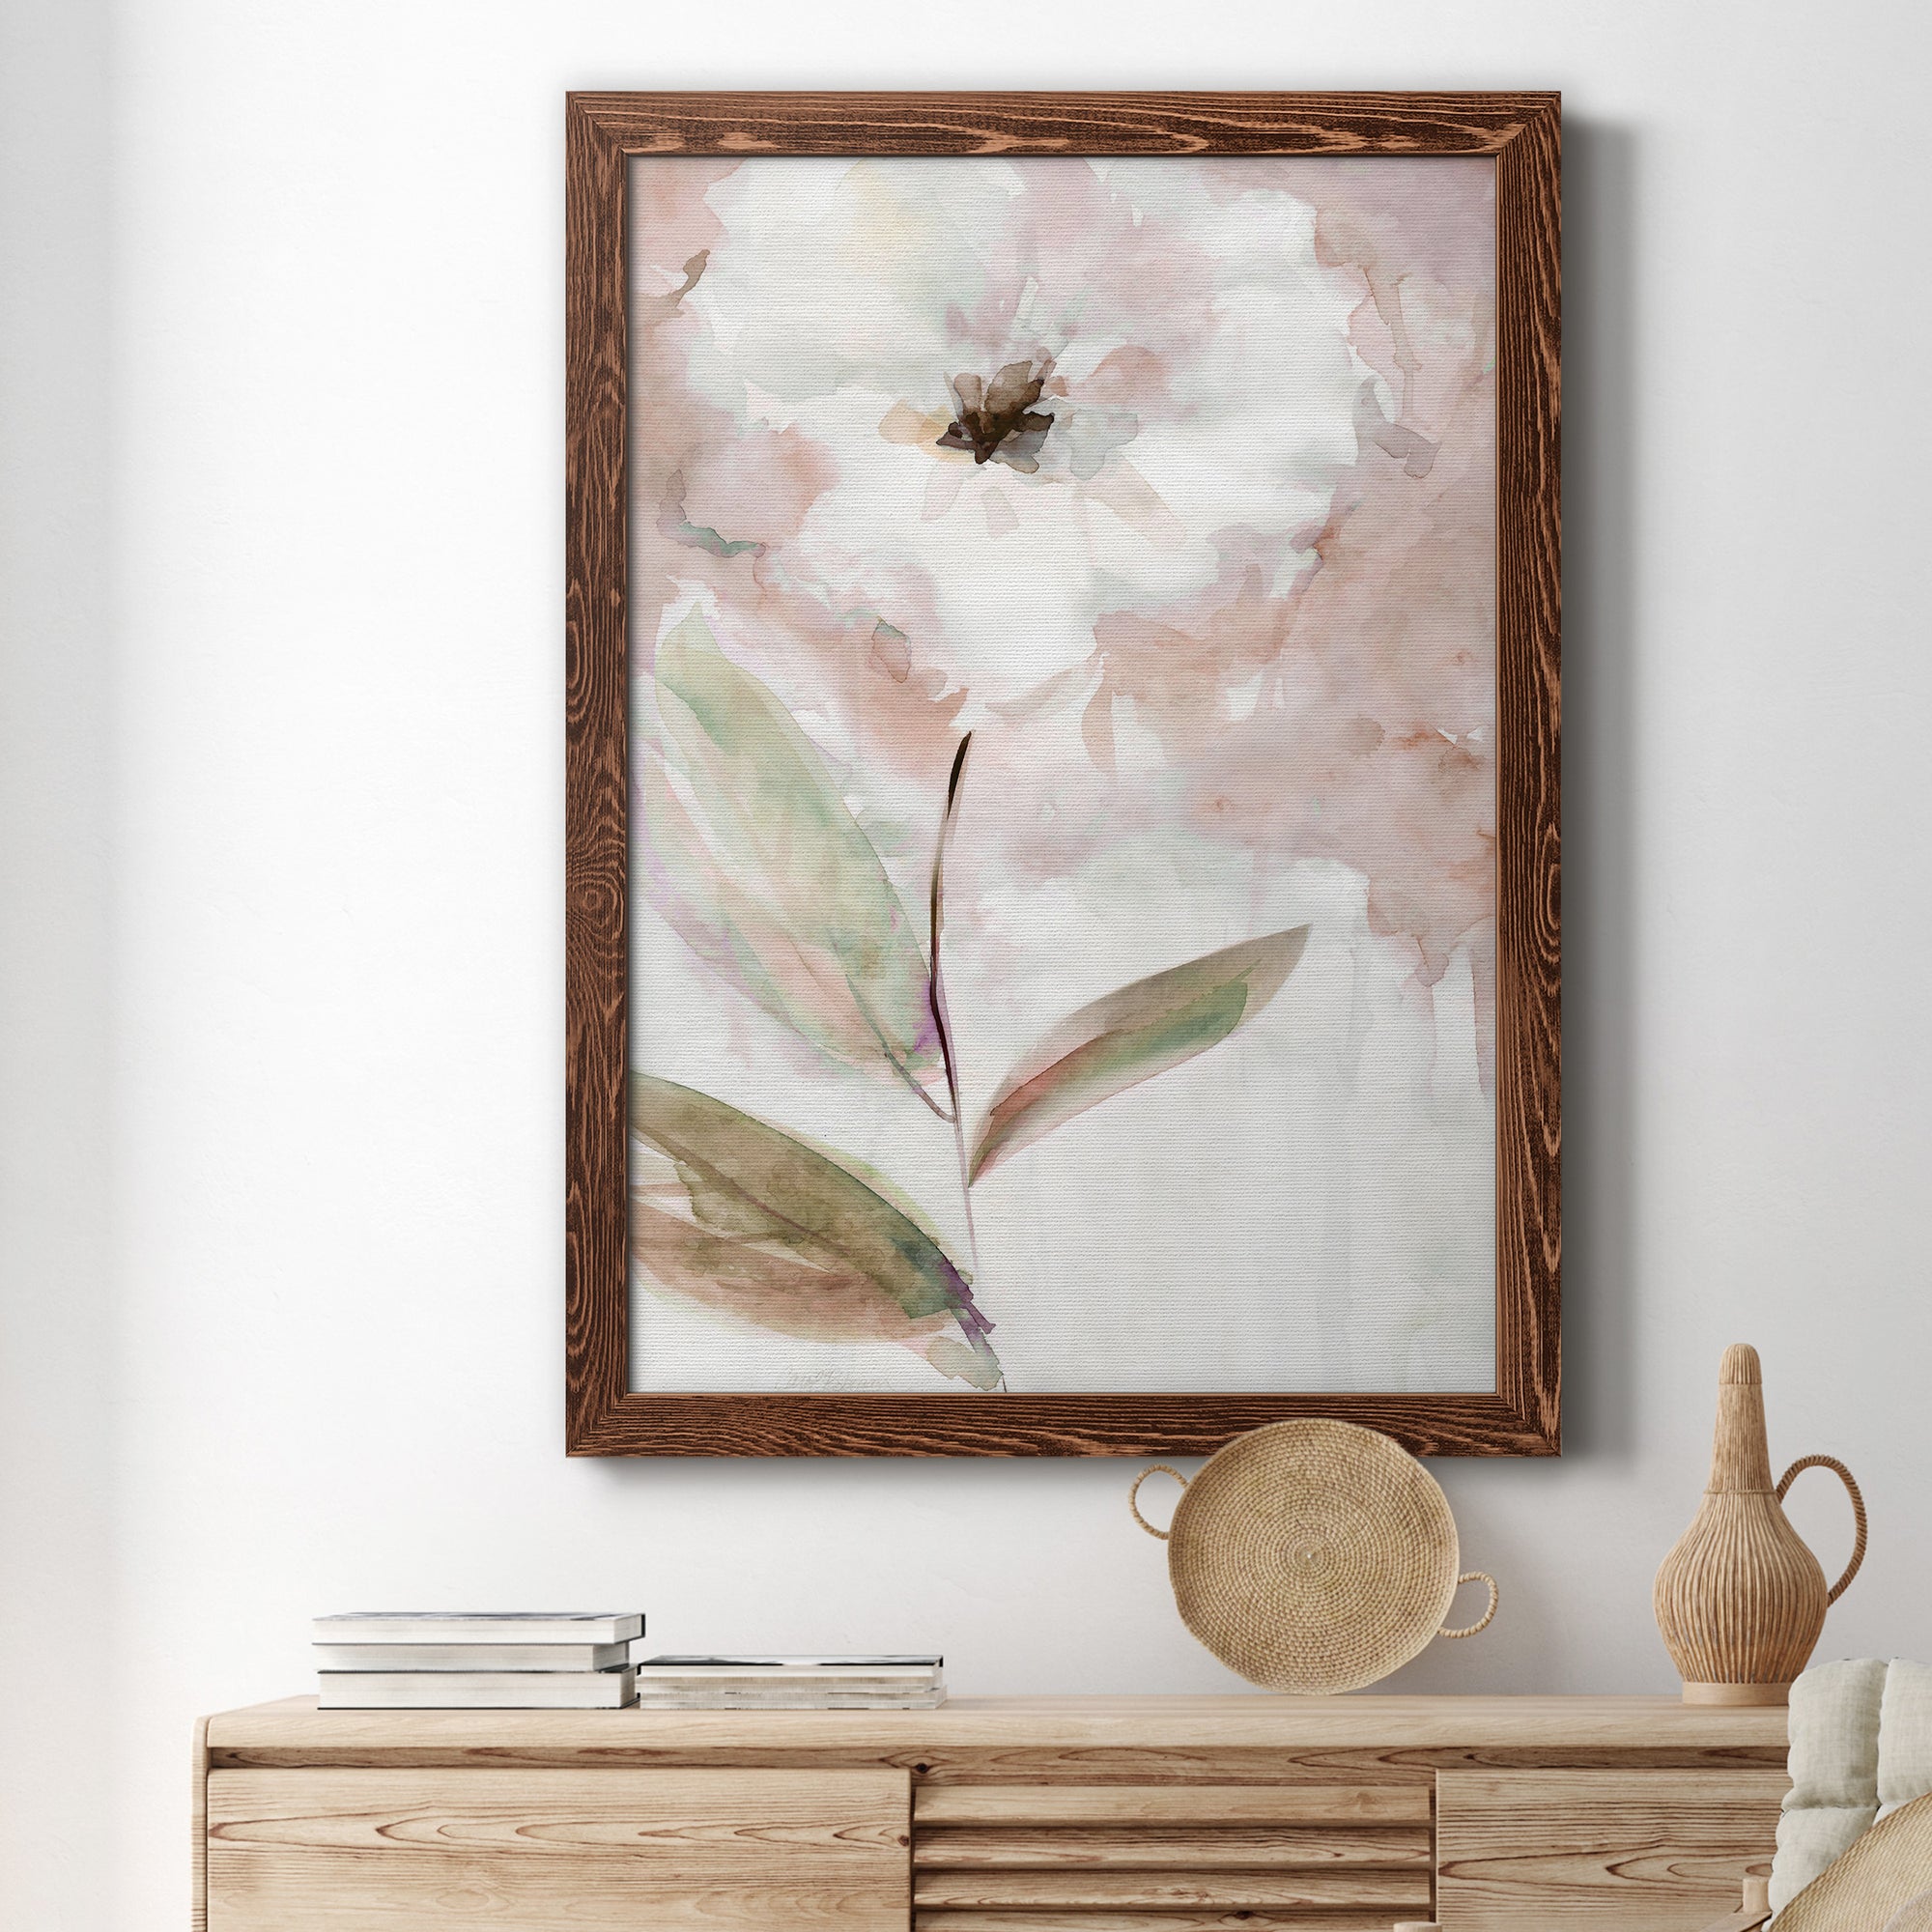 Summer Bloom I - Premium Canvas Framed in Barnwood - Ready to Hang